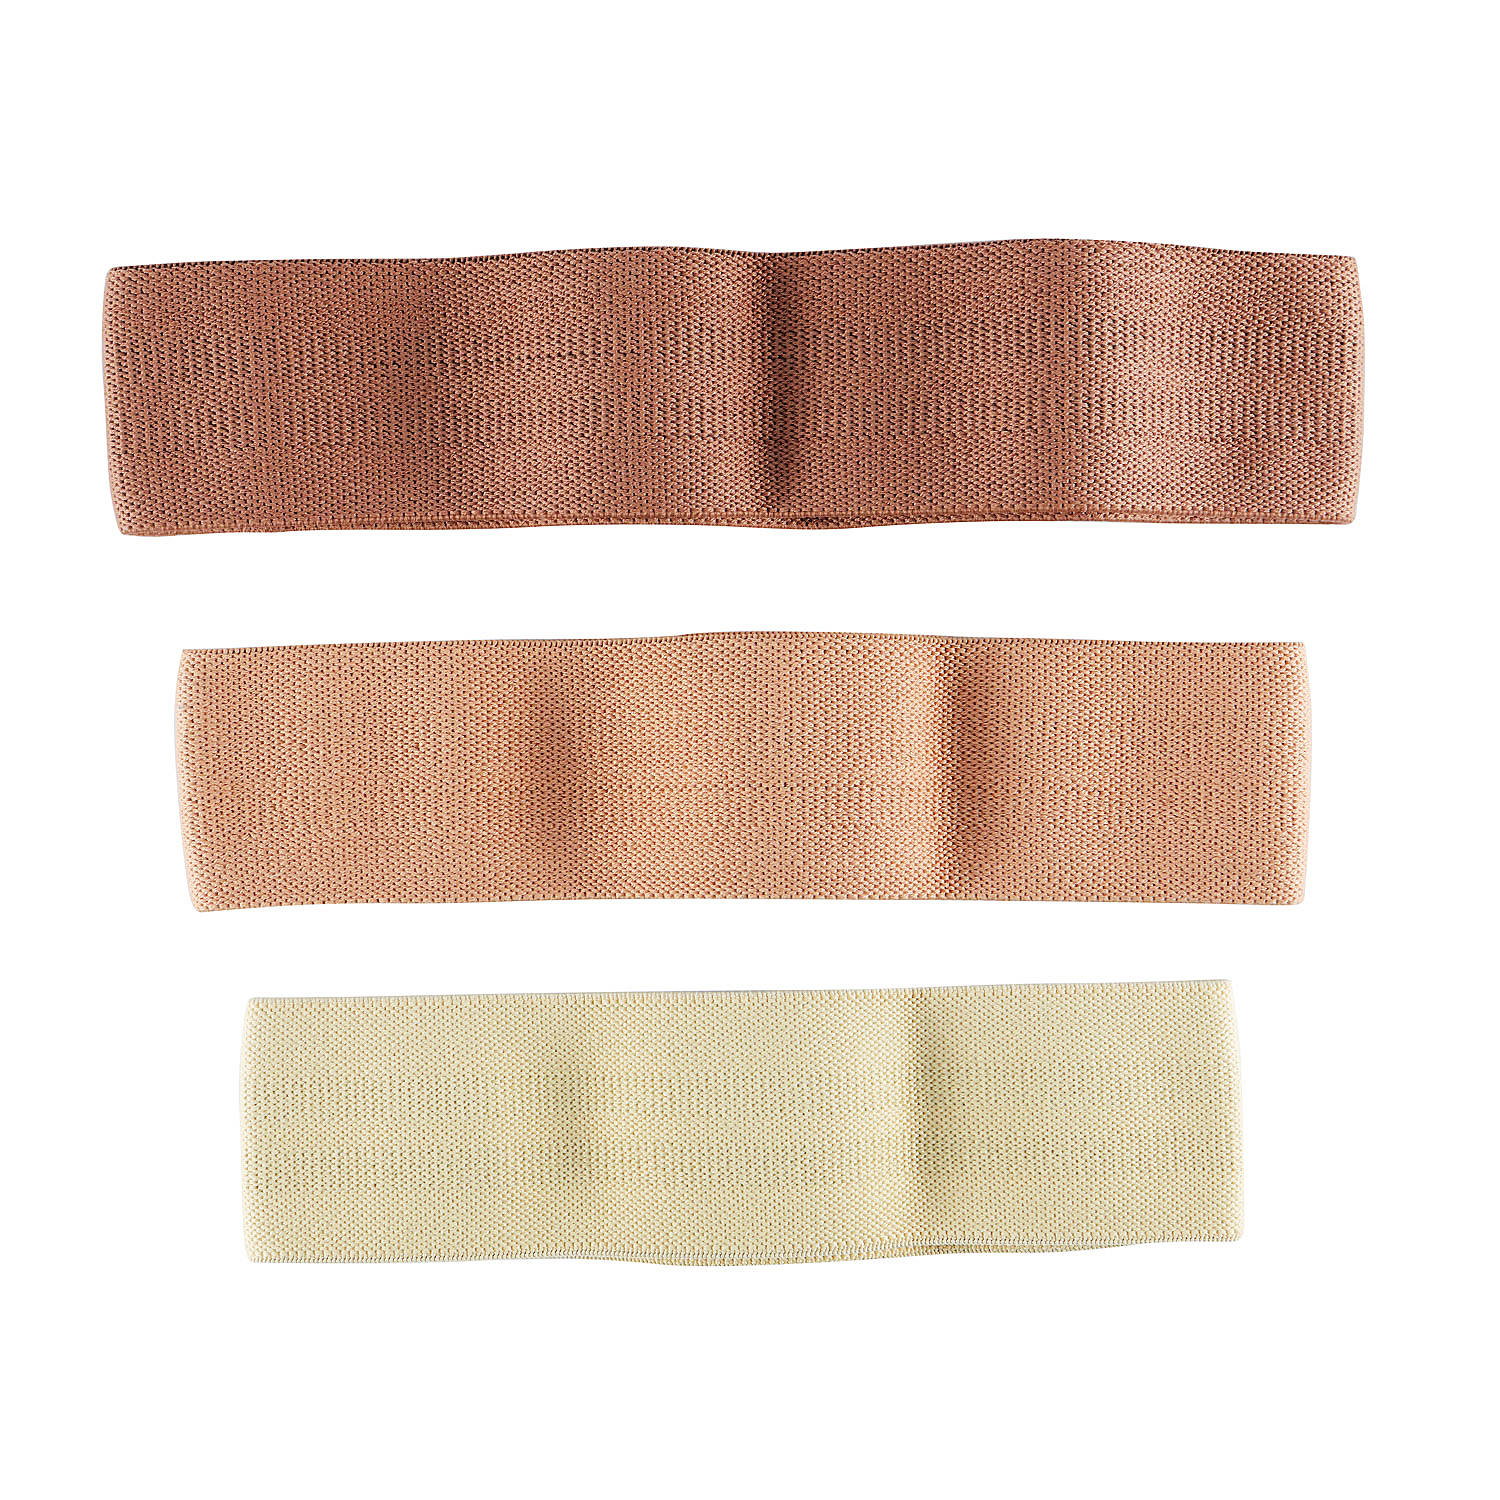 Custom Color Nude Cream Brown Booty Band Sets Sport Resistance Hip Circle Fitness Elastic Band